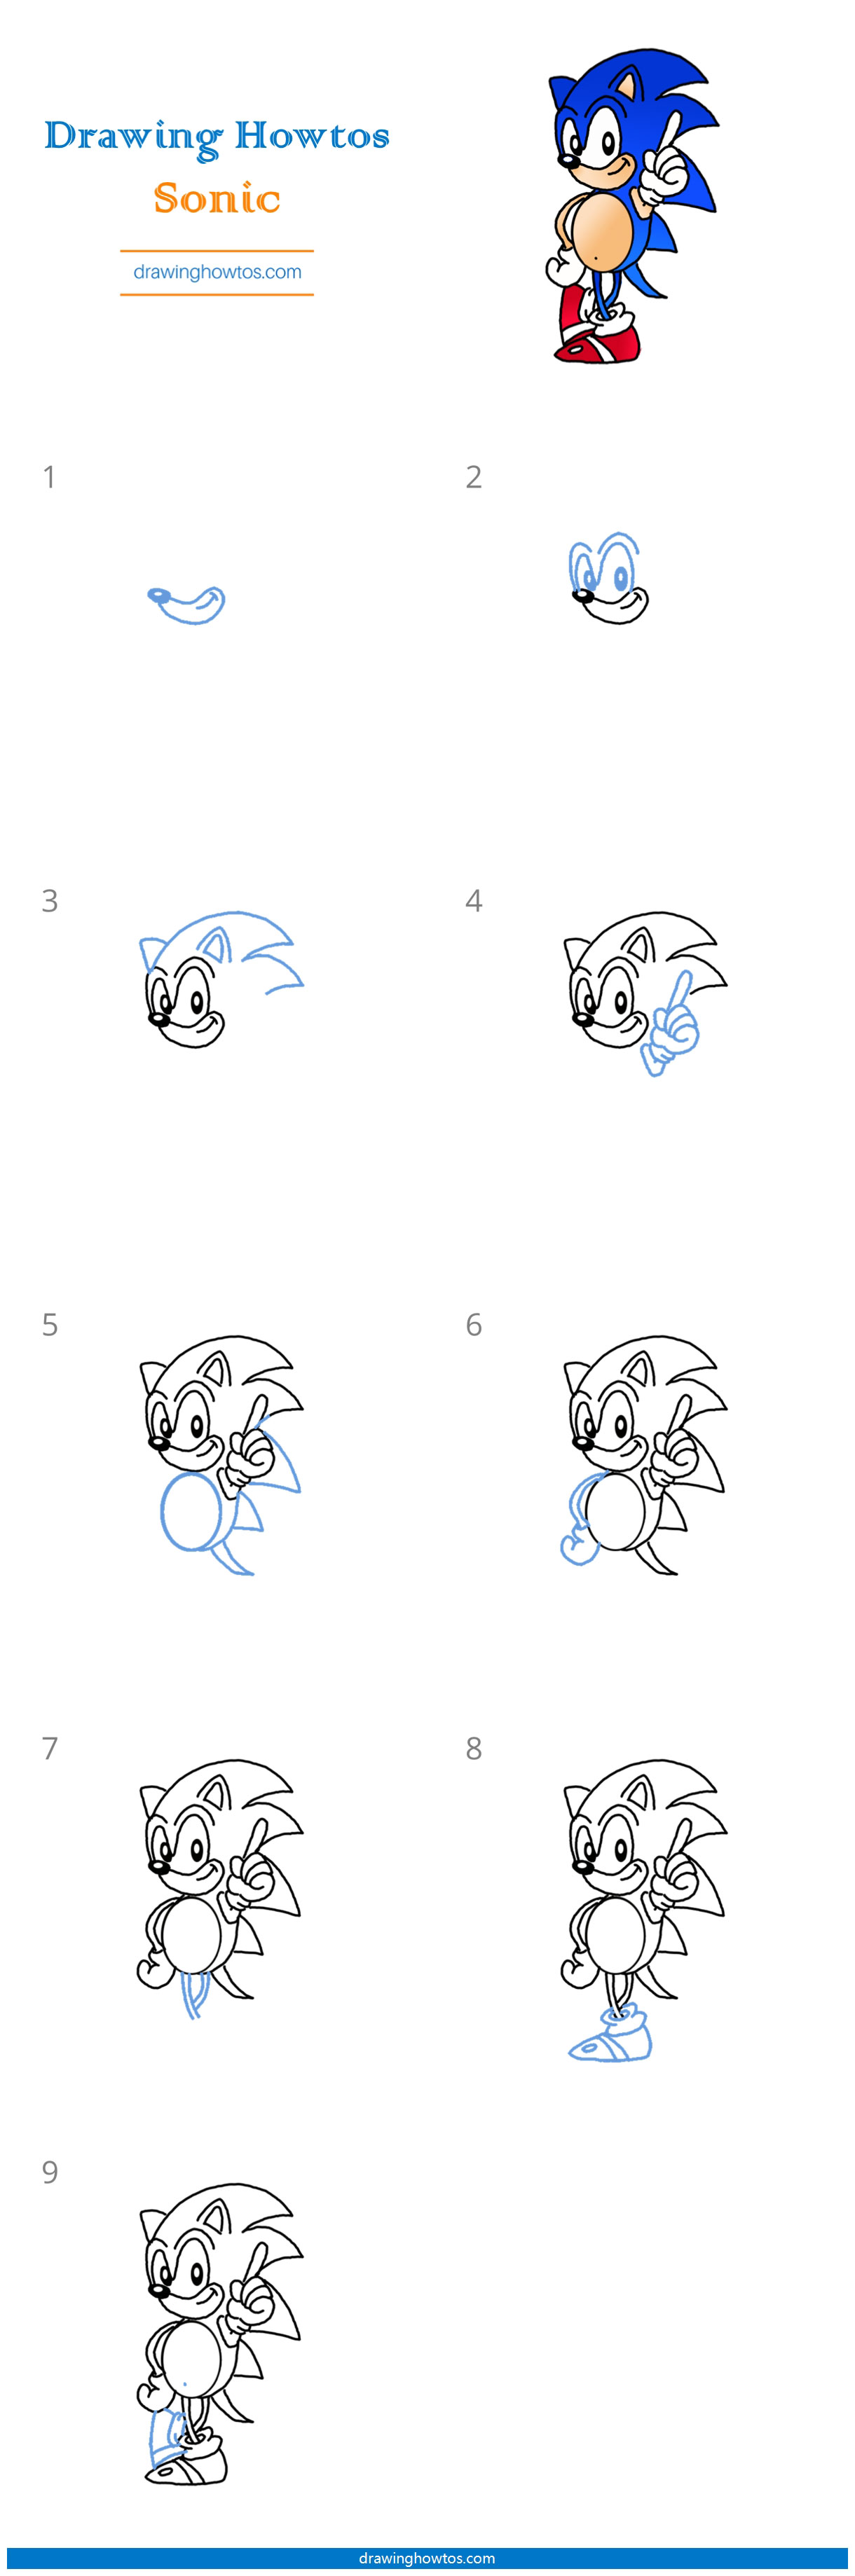 How to Draw Sonic the Hedgehog Step by Step Easy Drawing Guides